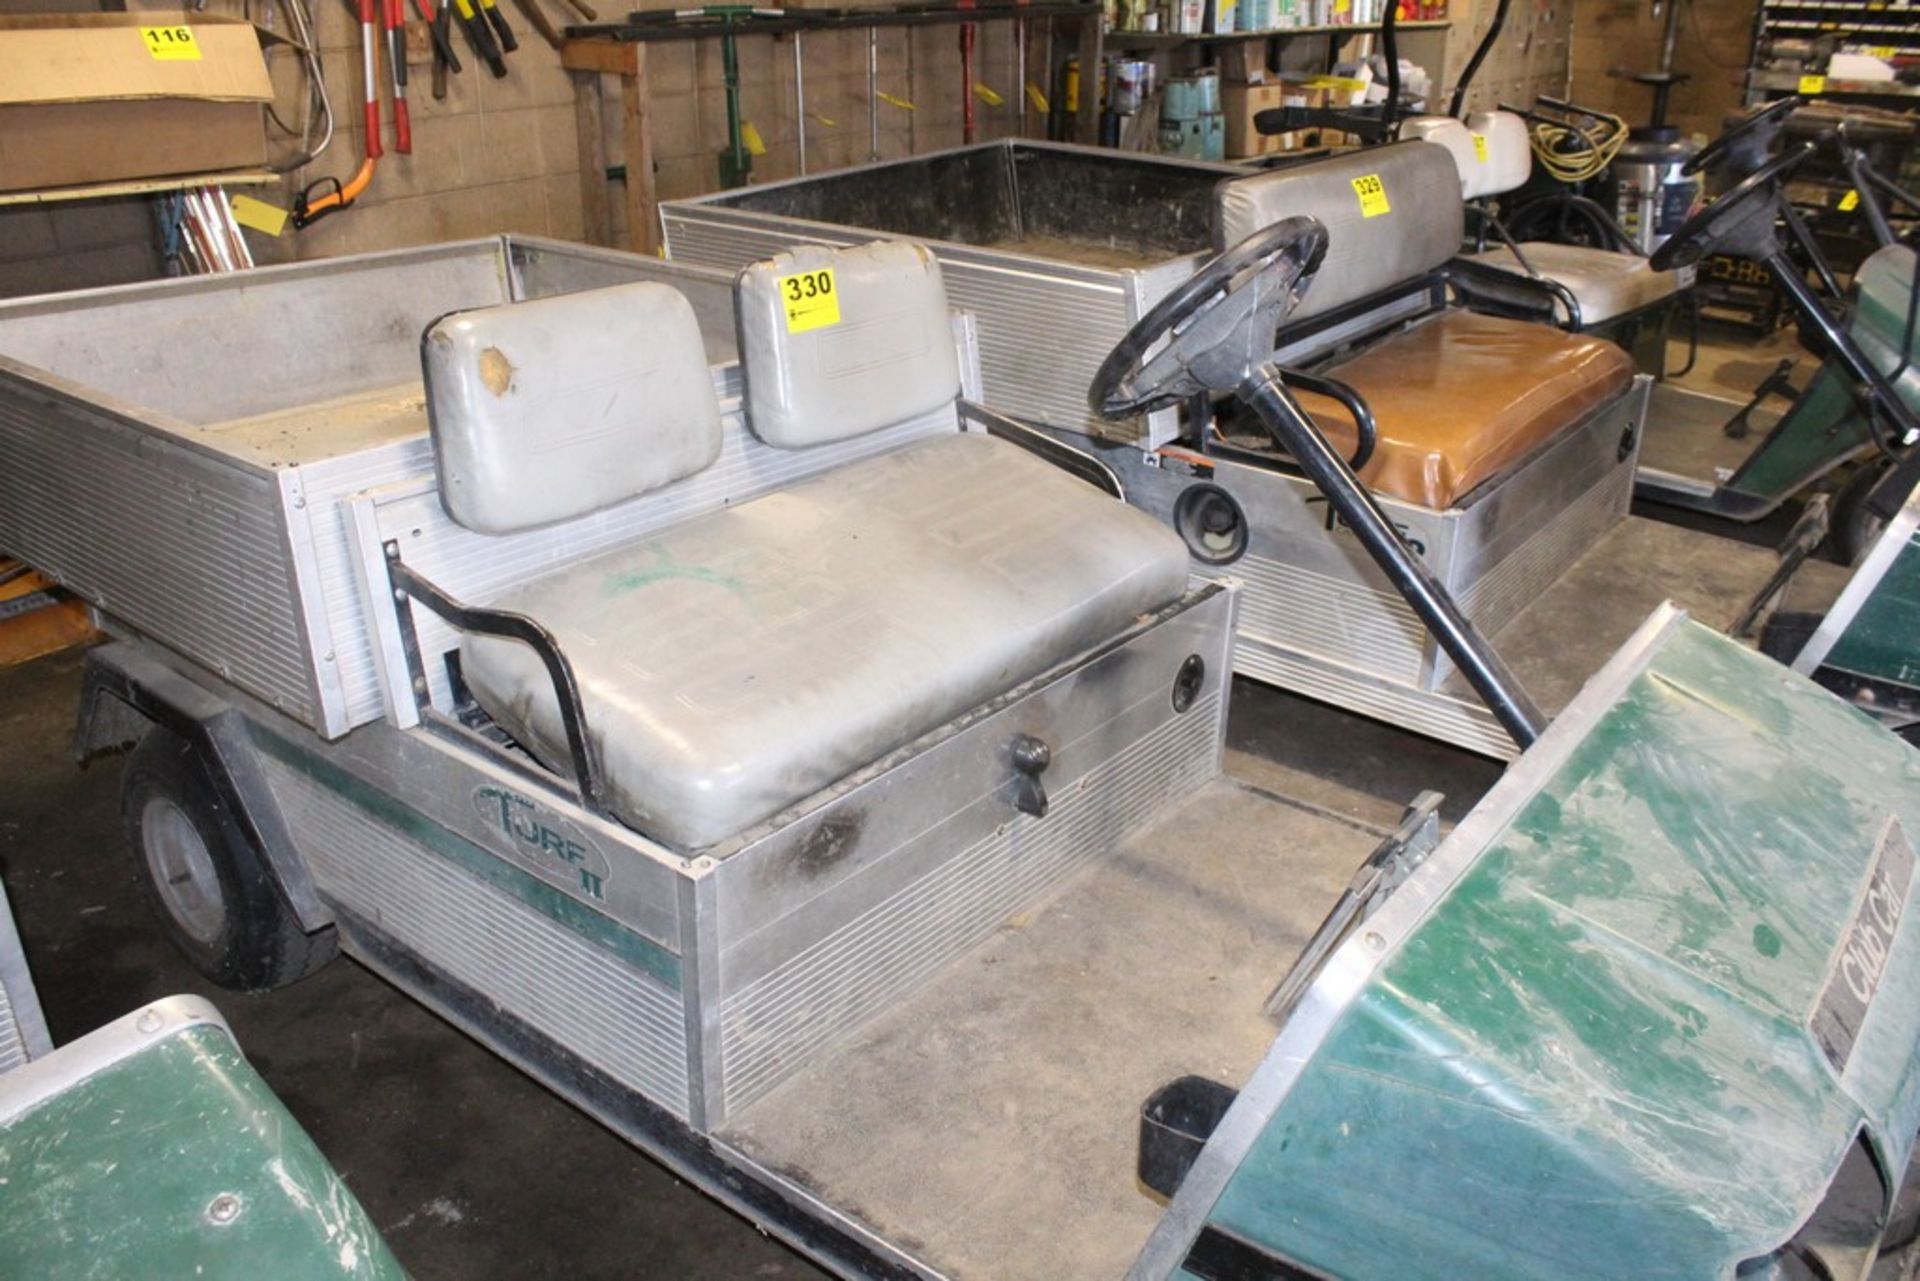 CLUB CAR TURF 2 GAS POWERED CART, MANUAL DUMP BED 4,562 HOURS CONDITION: TURNS OVER WITH A JUMP - Image 3 of 6